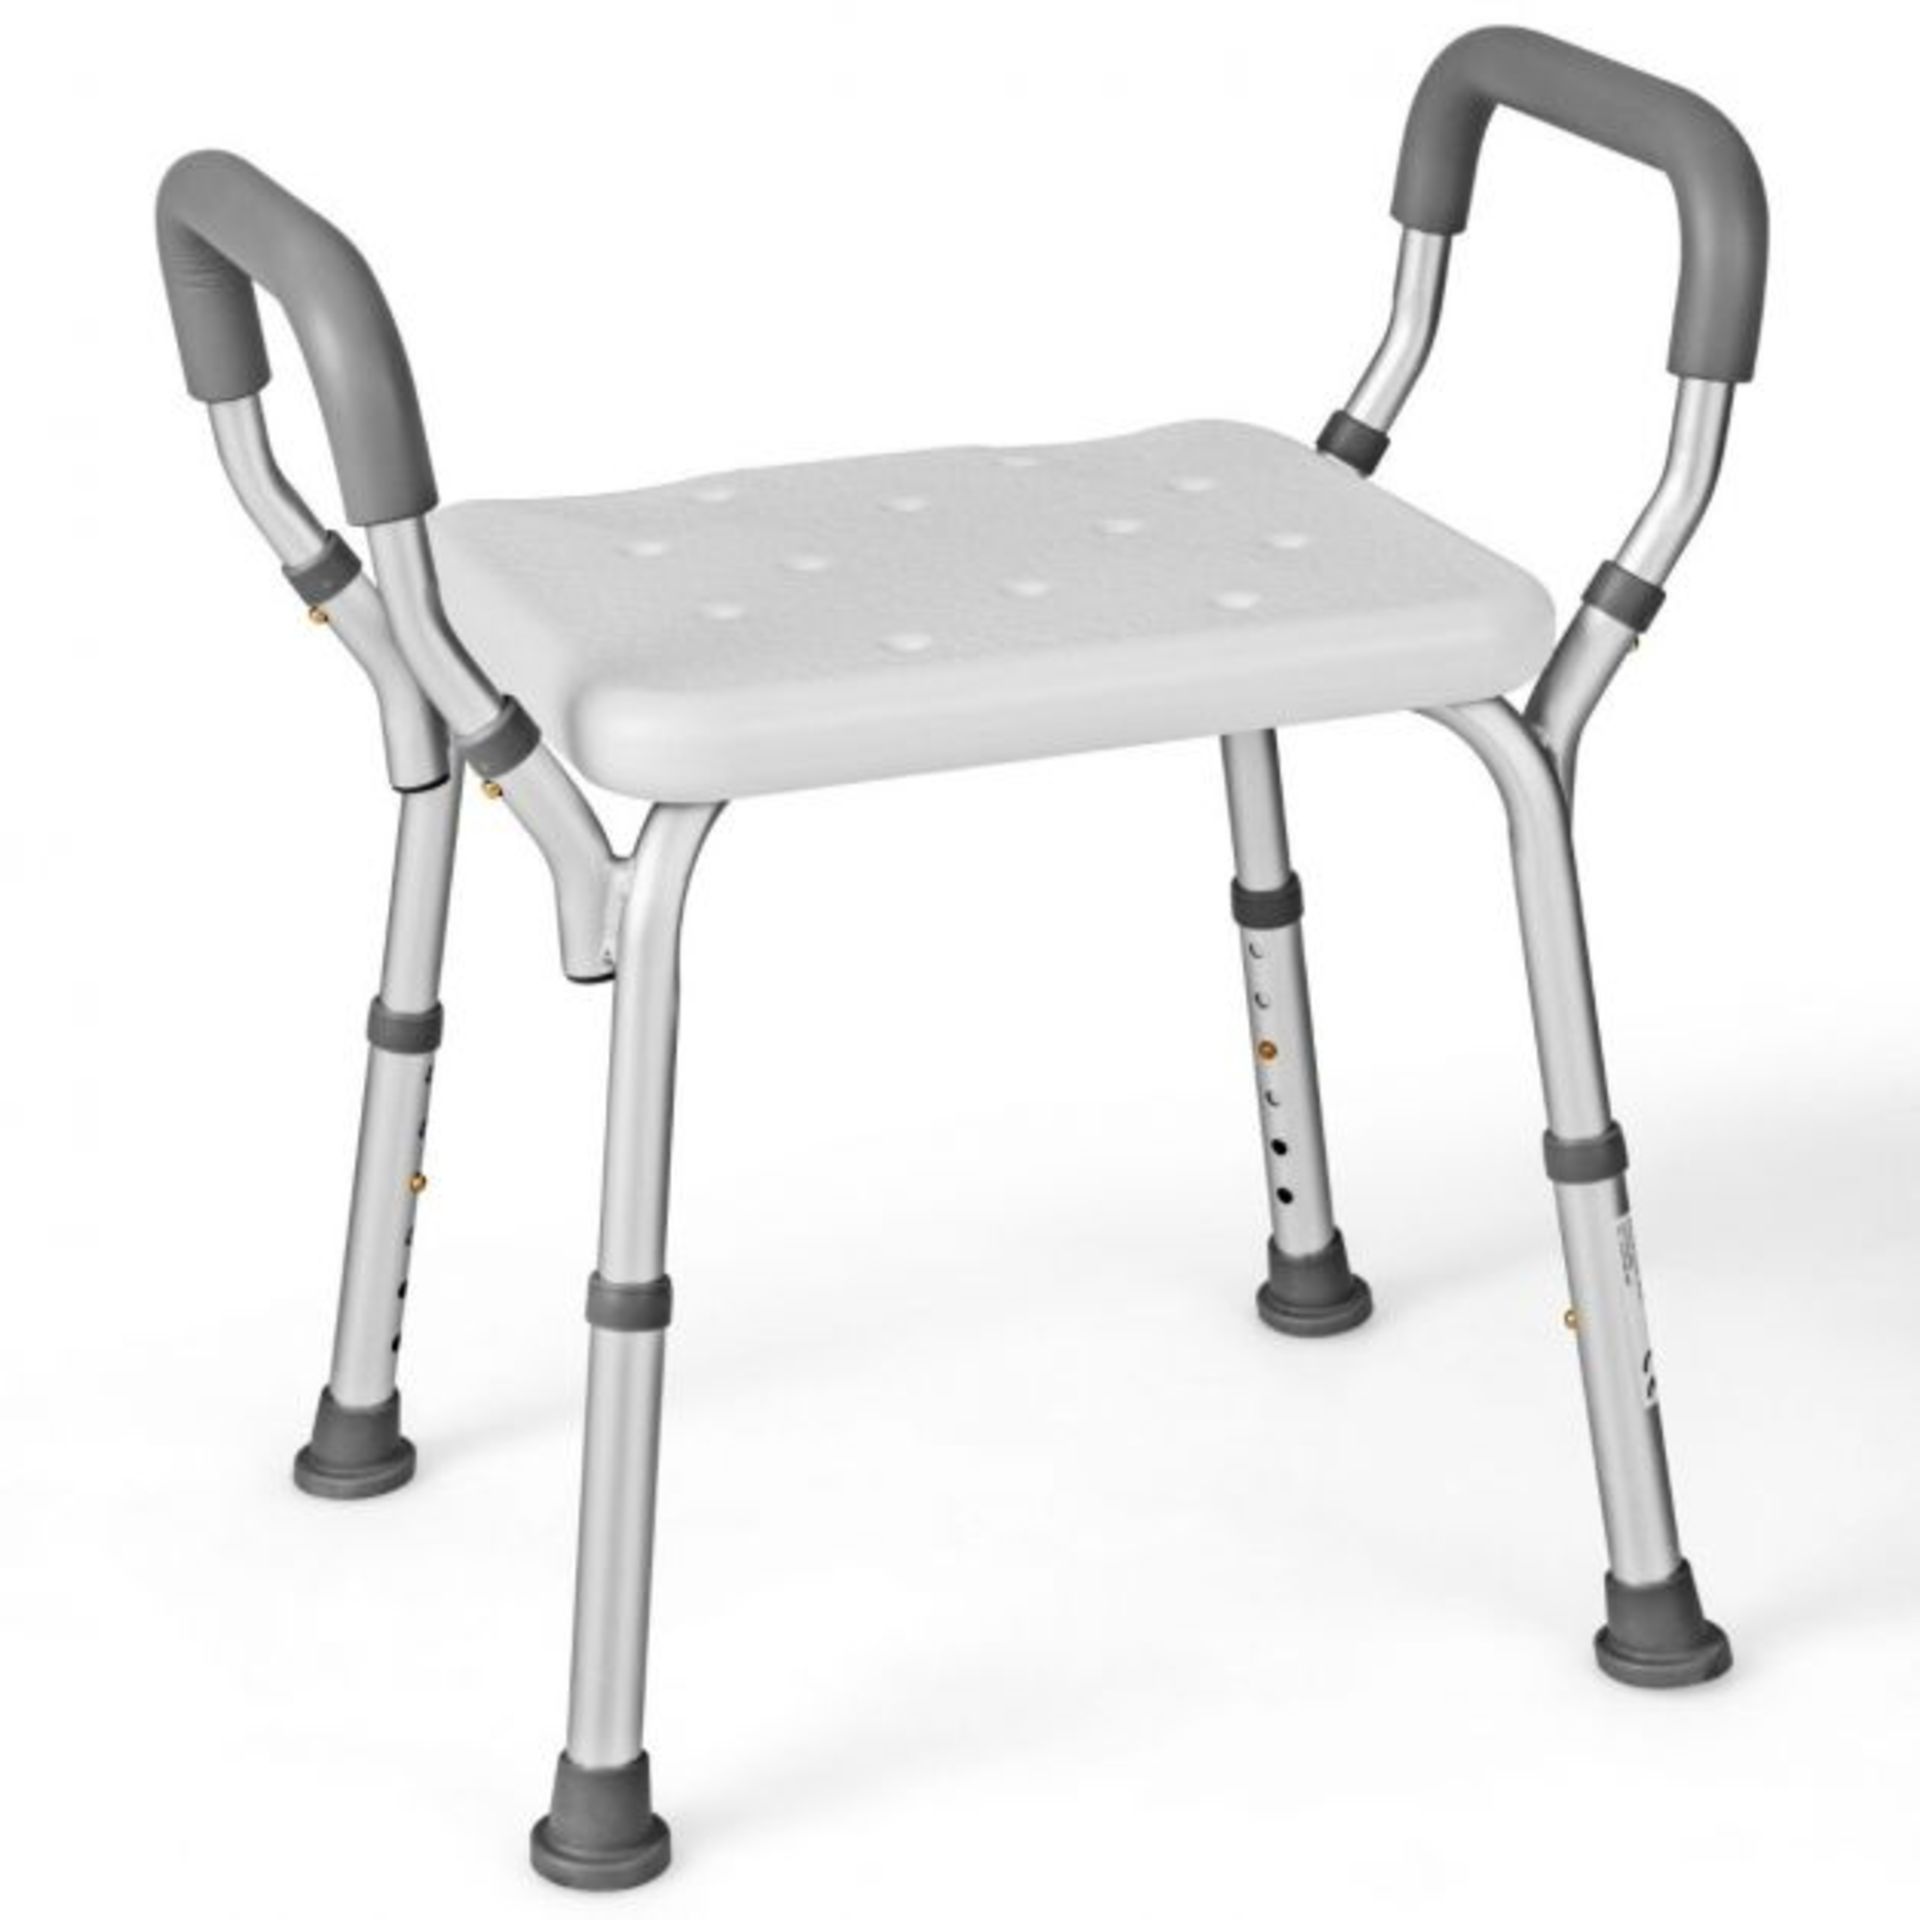 Bath Chair Shower Bench with Detachable Padded Arms